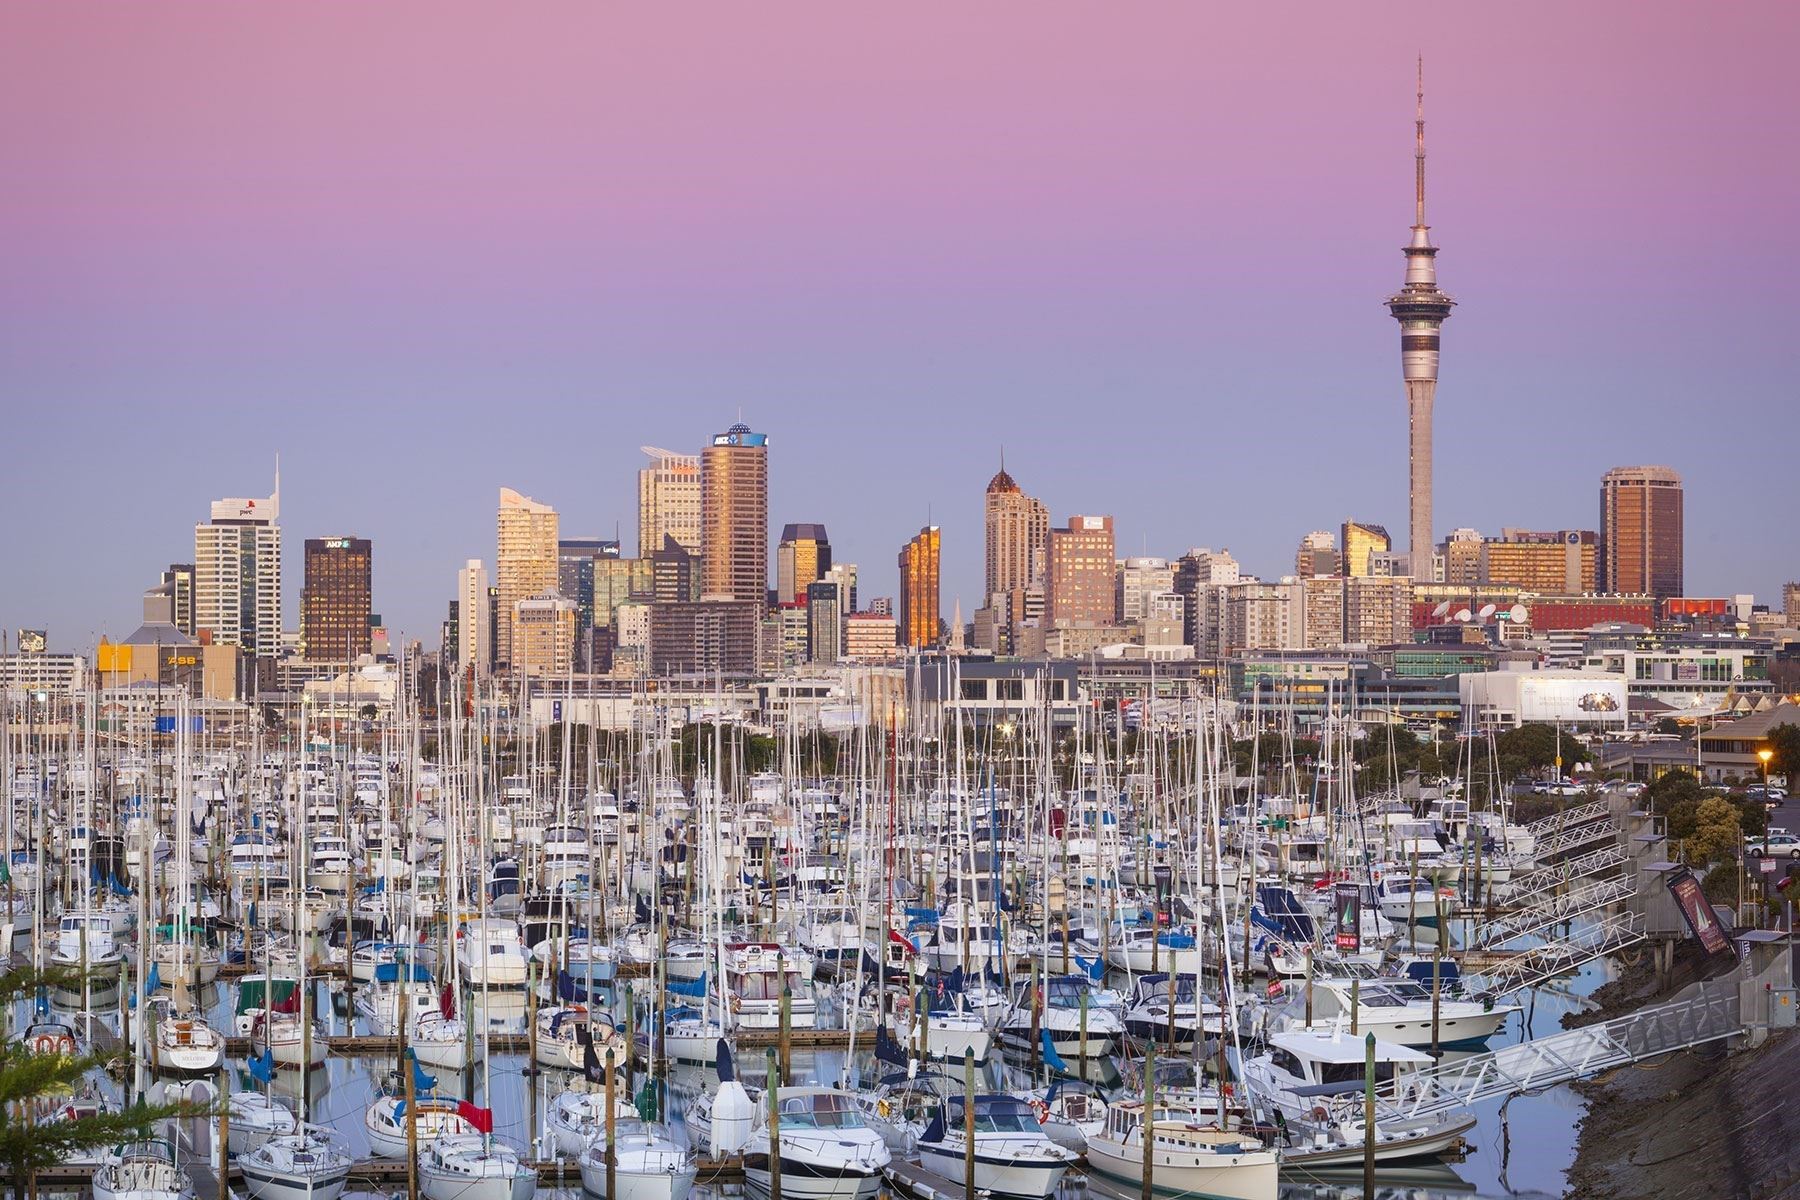 "Clean, youthful, adventurous, beautiful" is how readers described Auckland, which has galloped up to number one from 16th place in 2013. "The people are friendly, and their humour and view on life is something to aspire to attain", one reader opined.